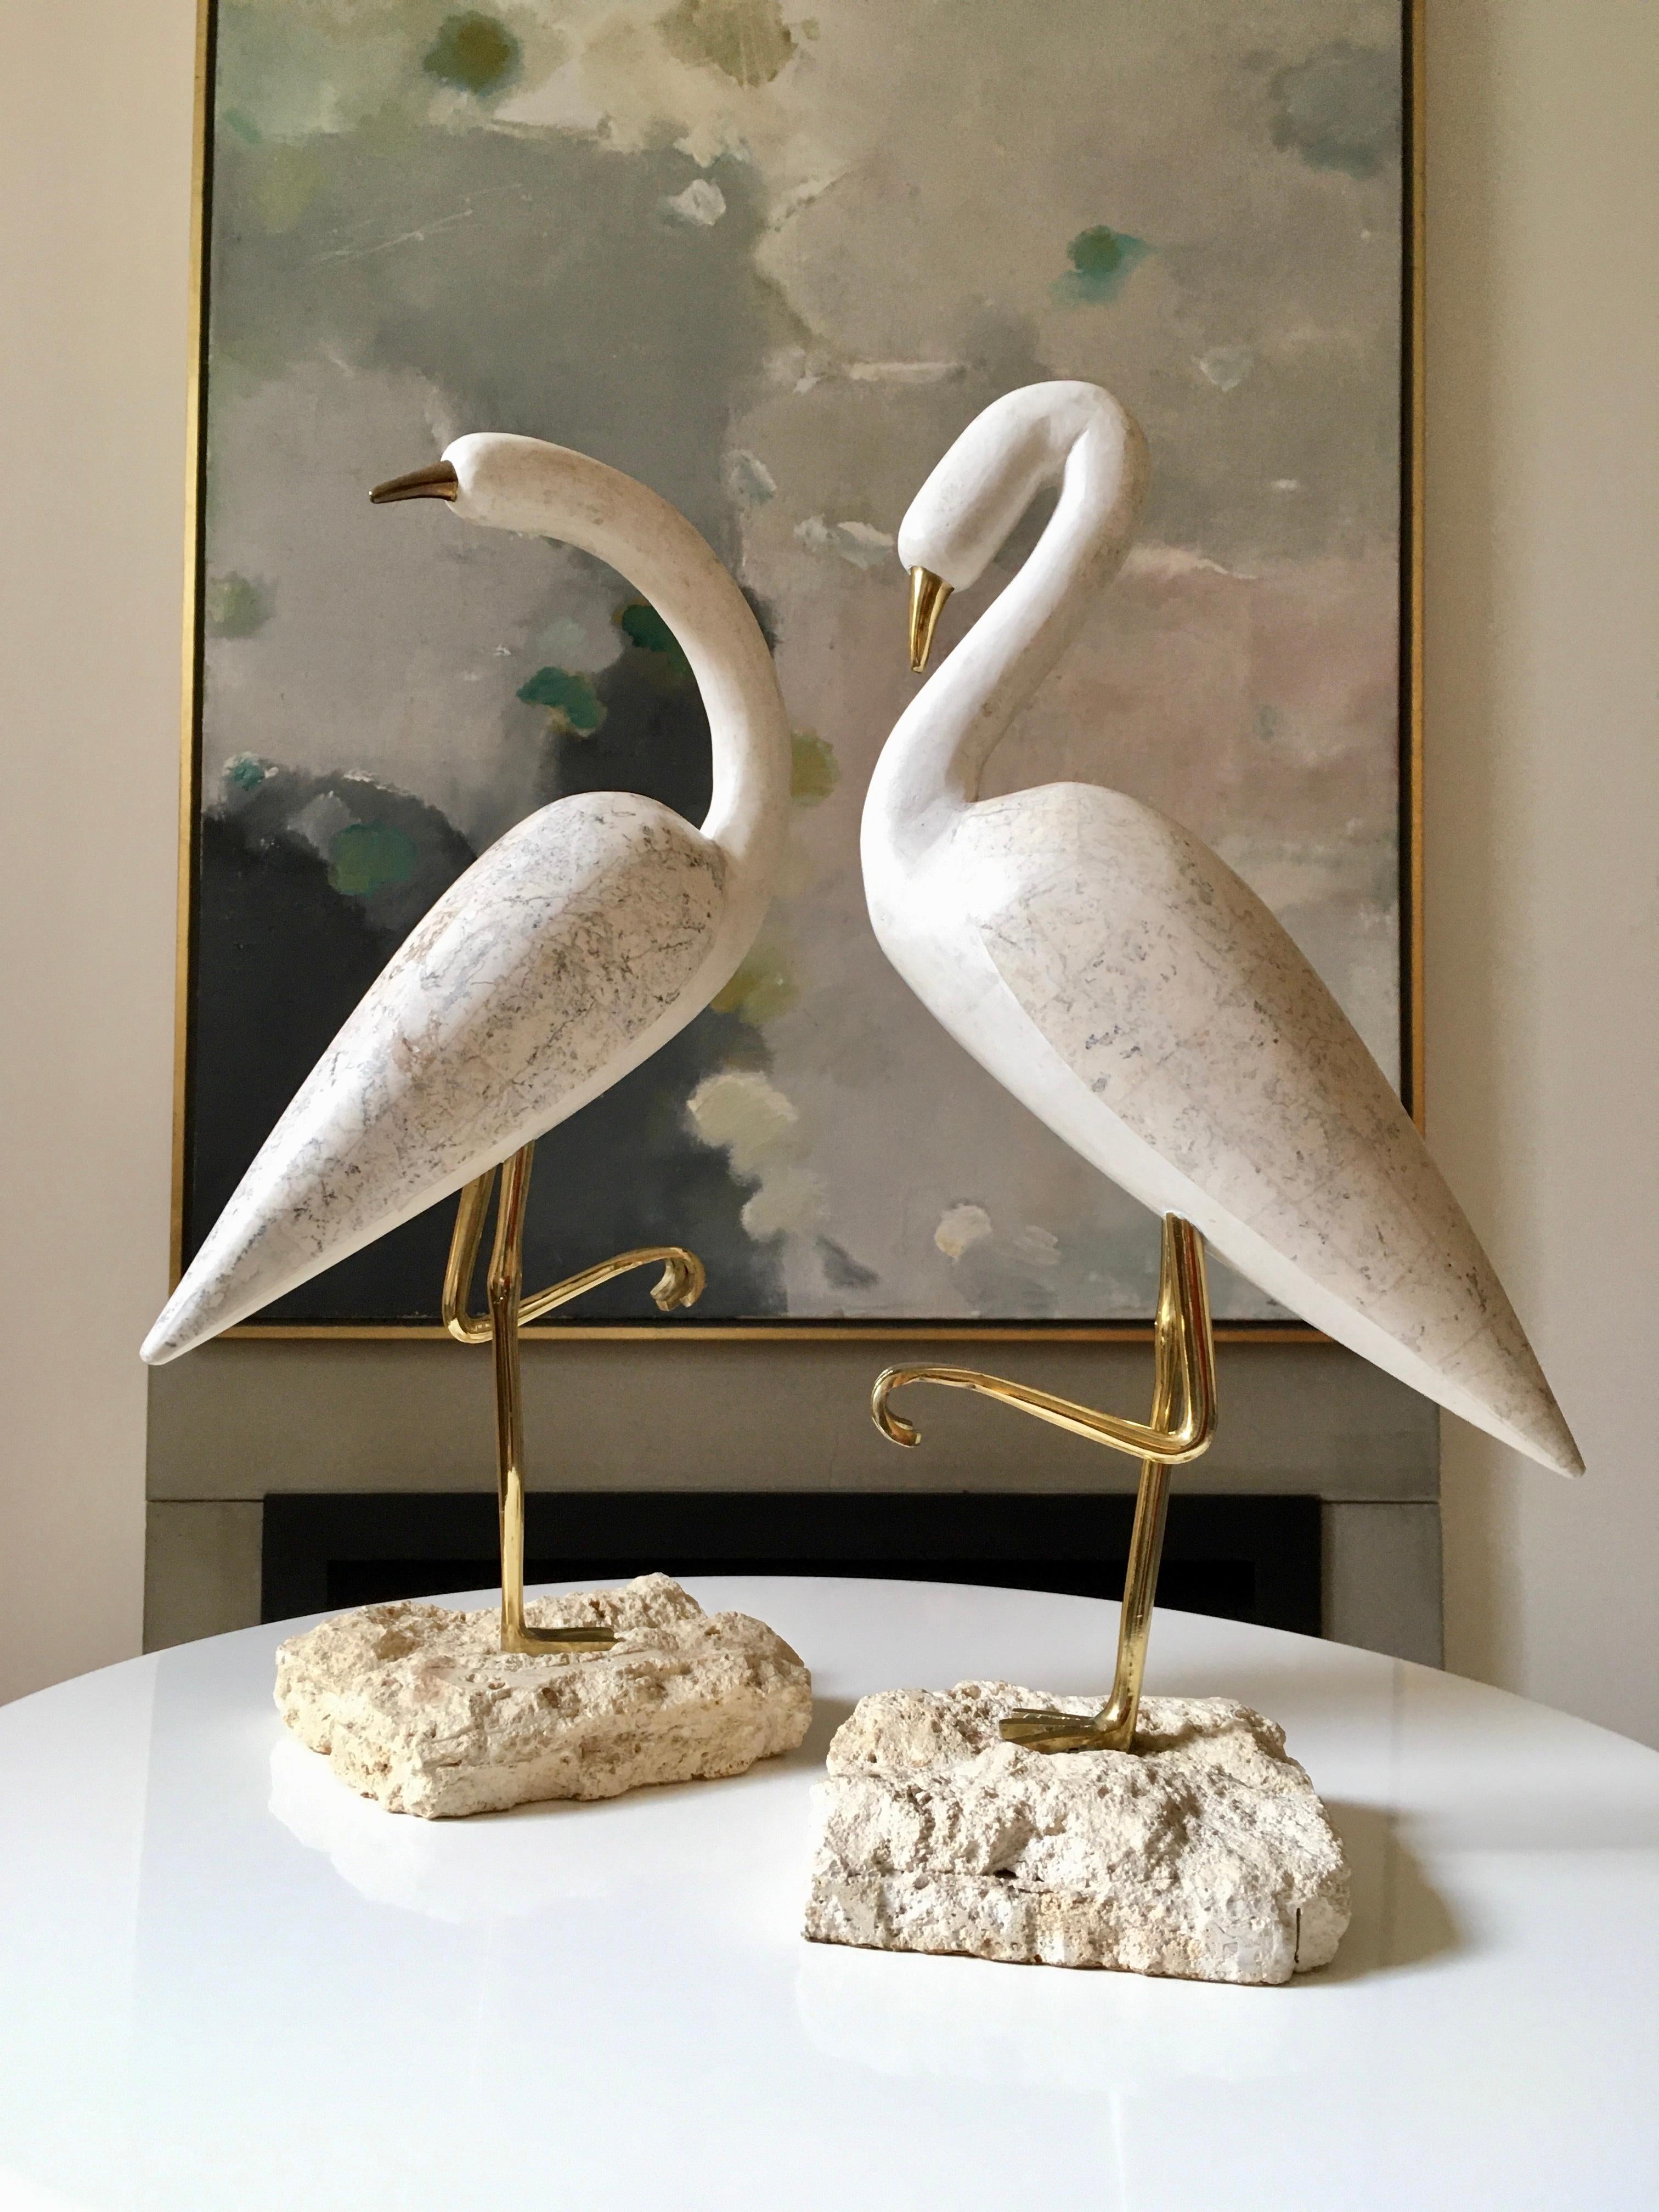 Pair of tessellated marble and travertine stone Heron with forged solid brass legs, mounted on rough hewn stone bases. A thin layer of soft felting to base to prevent damage to surfaces. Very nicely made. 

In excellent condition, these birds make